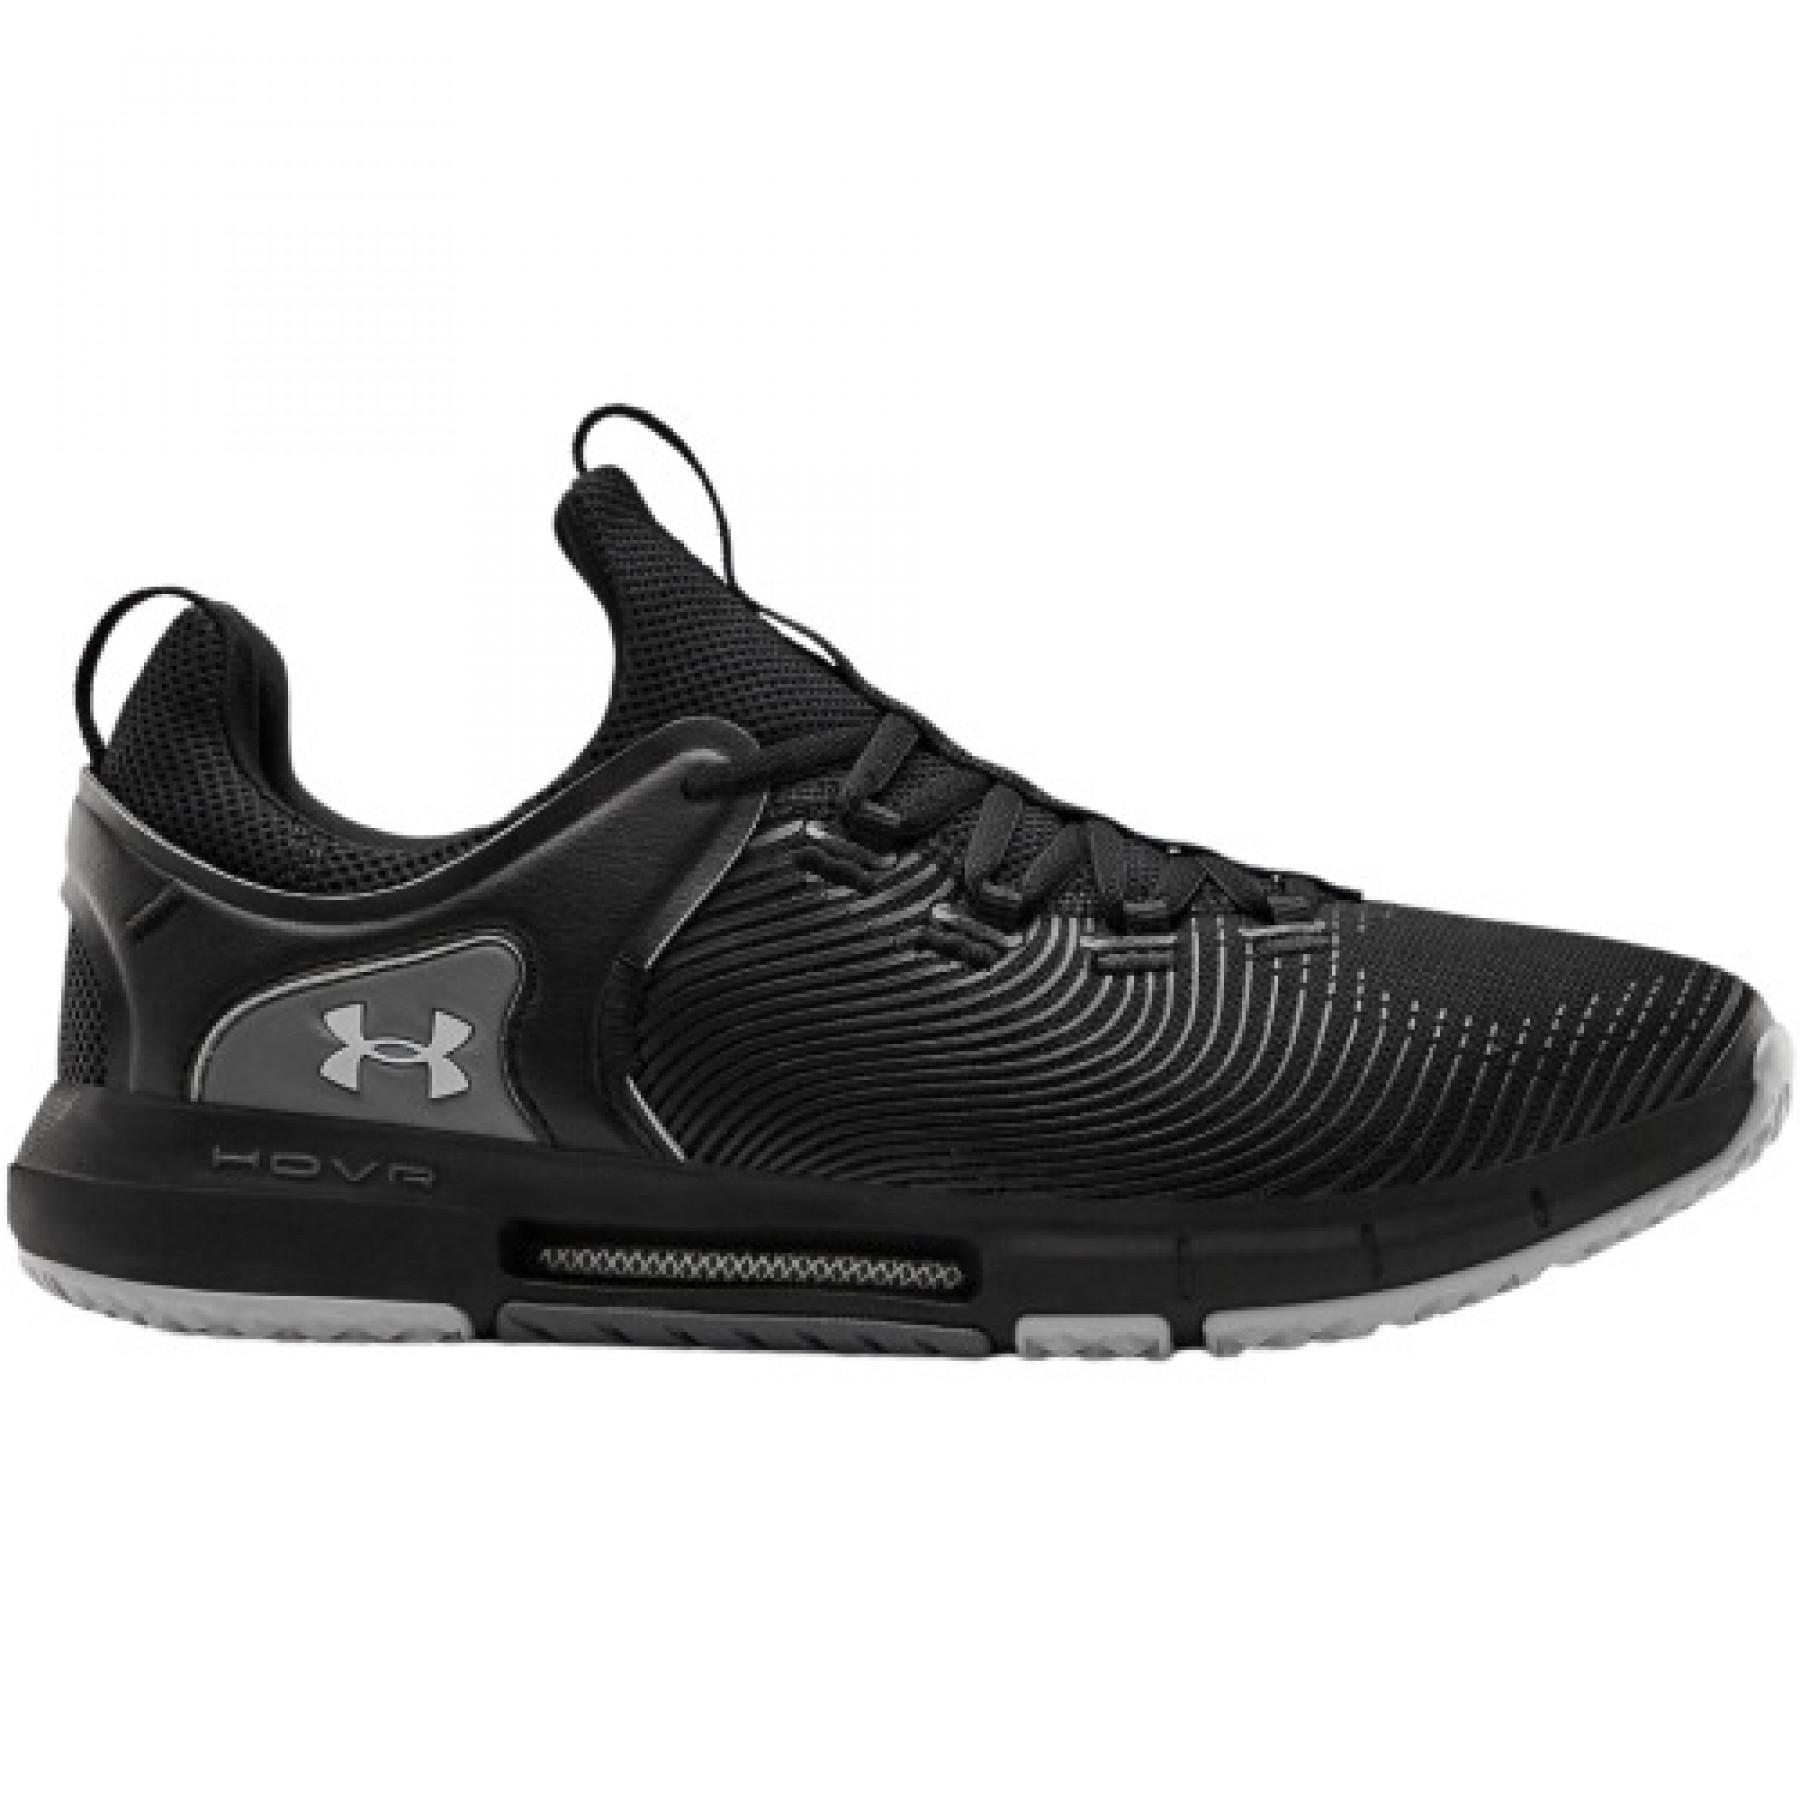 Chaussures Under Armour HOVR™ Rise 2